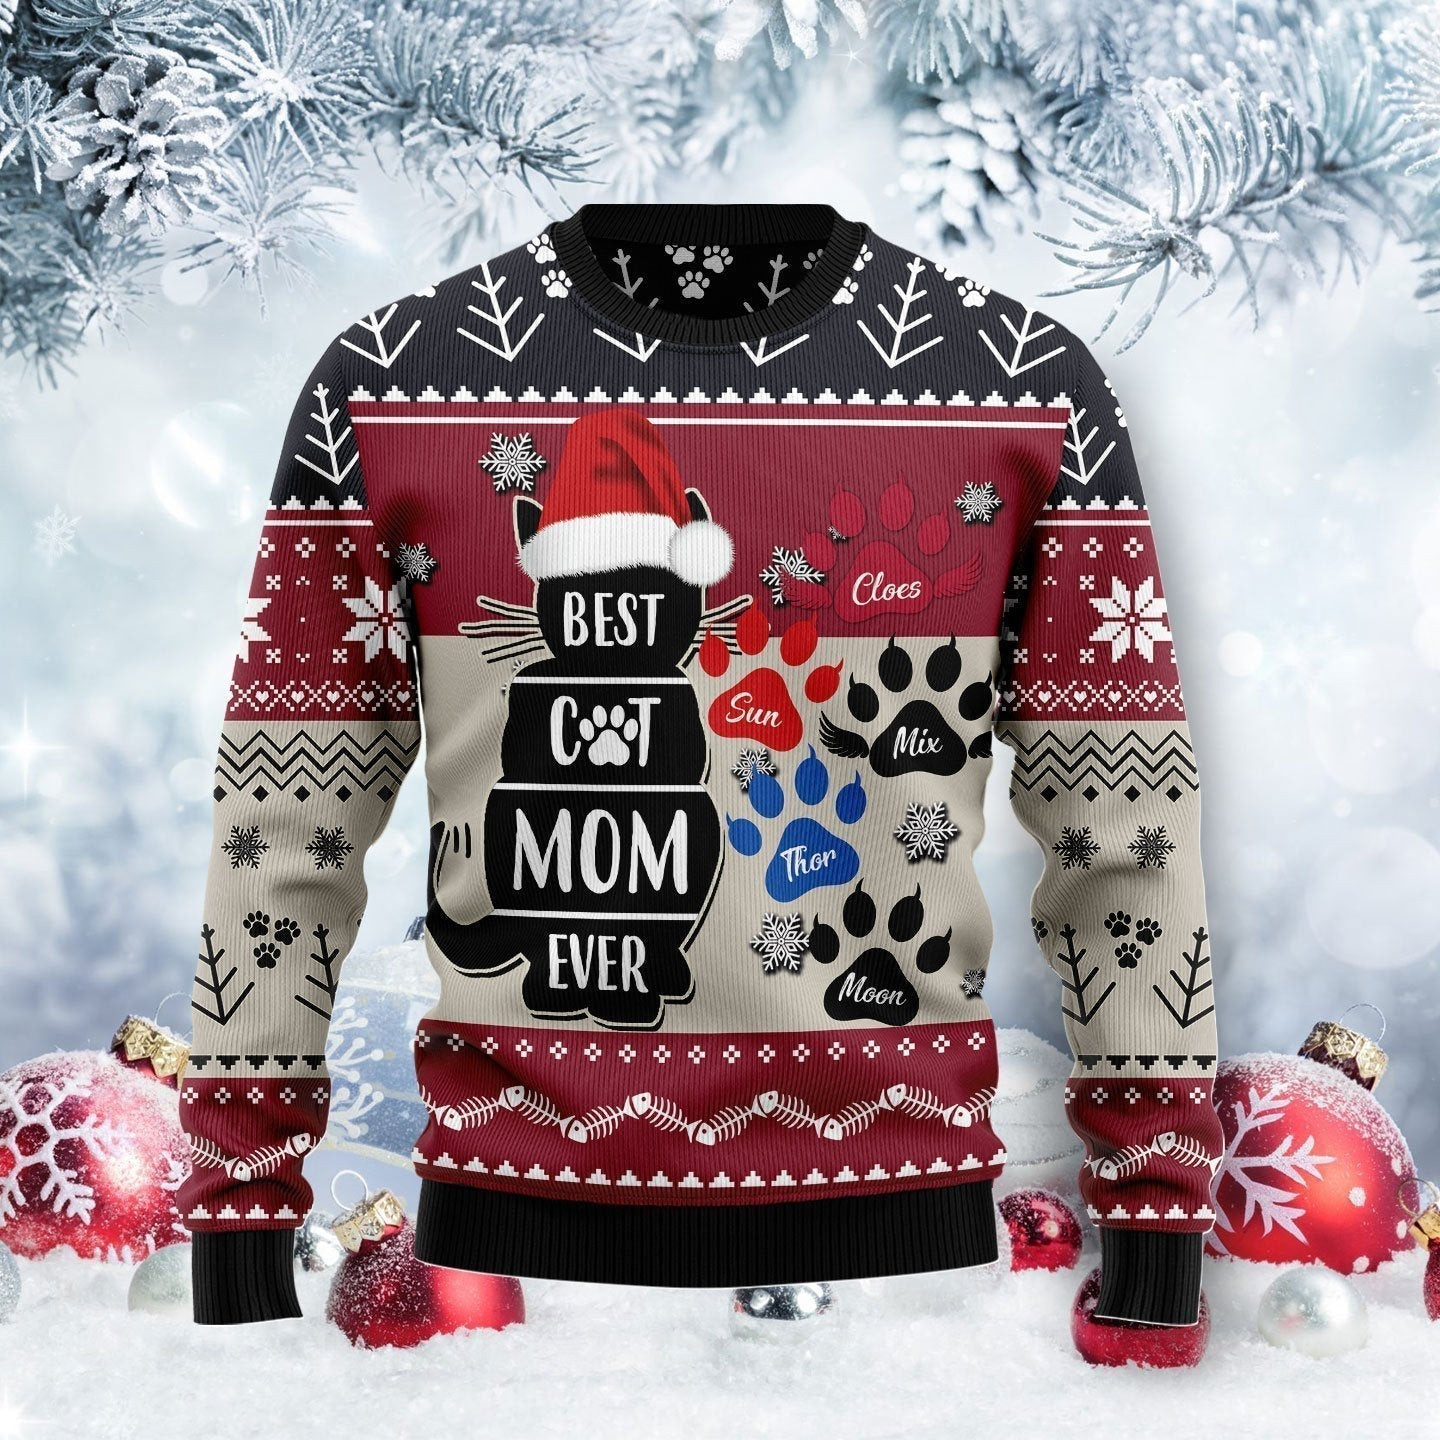 Best Cat Mom Ever Ugly Christmas Sweater Ugly Sweater For Men Women, Holiday Sweater